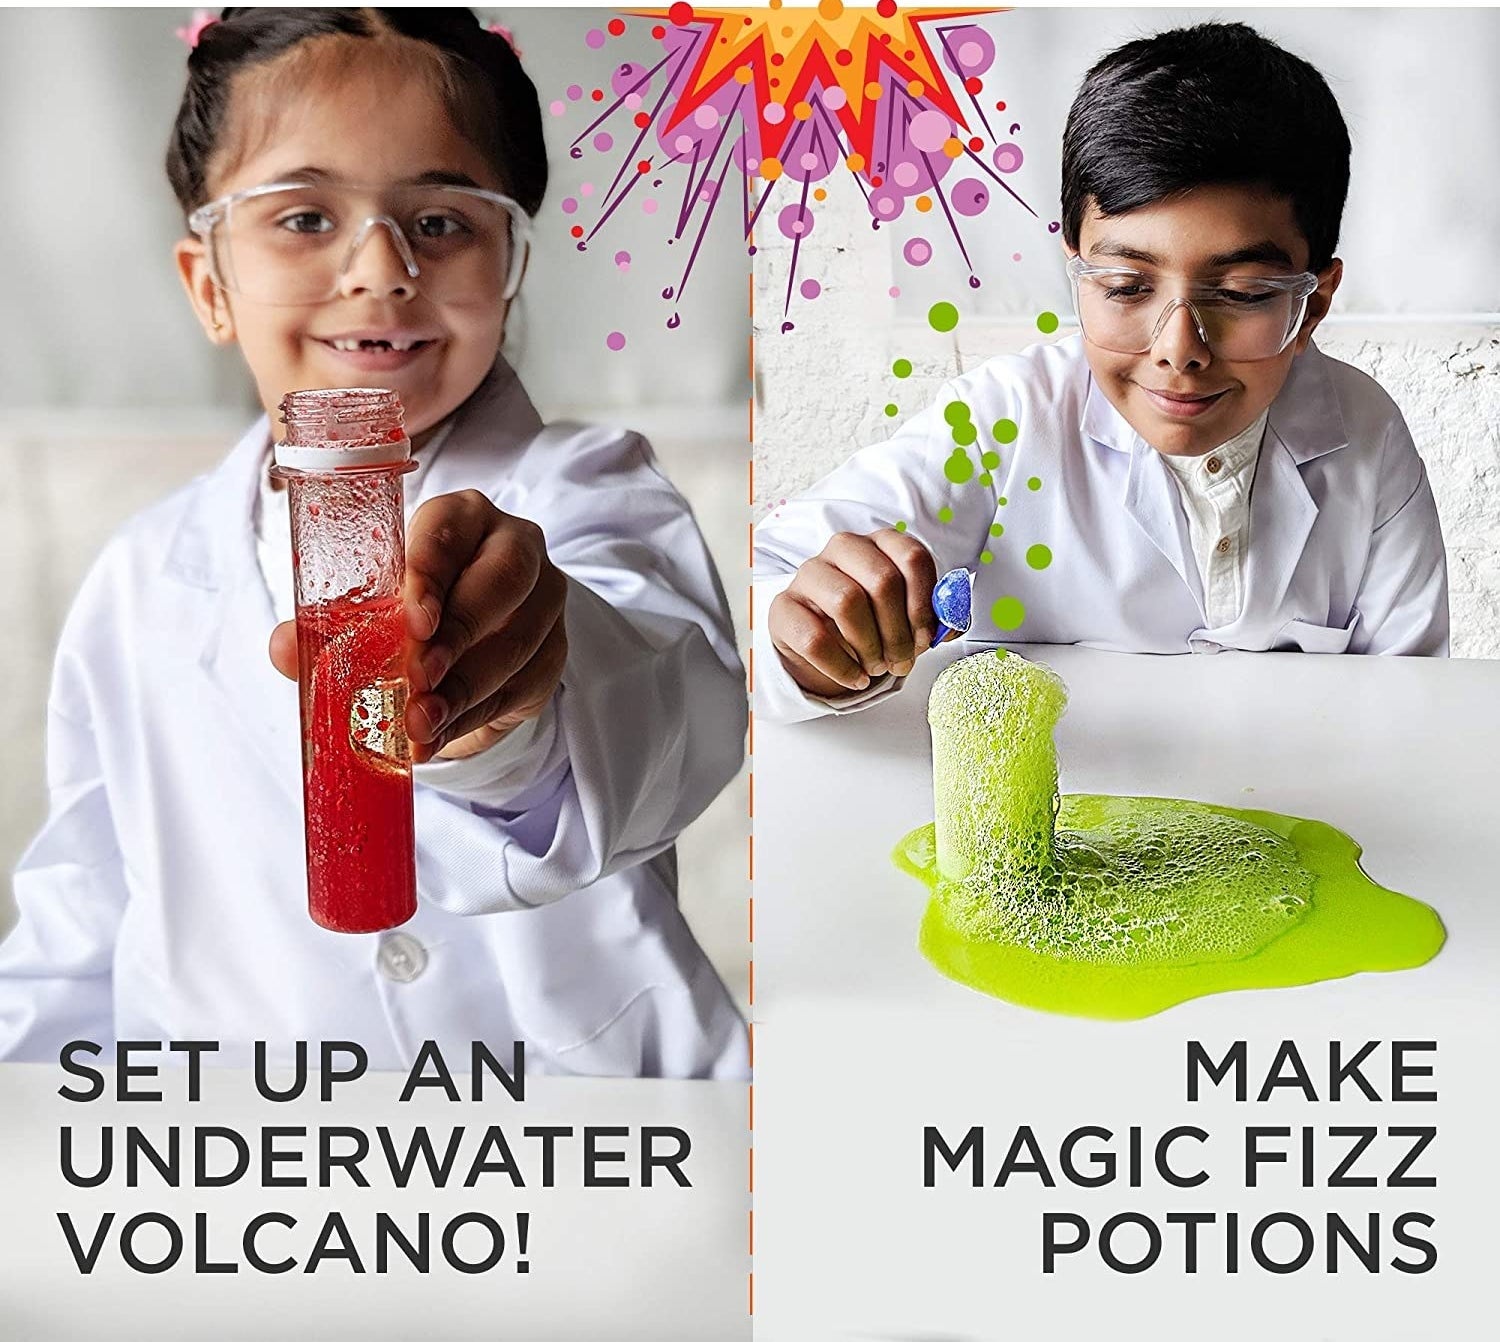 Two images showing a girl and a boy experimenting.